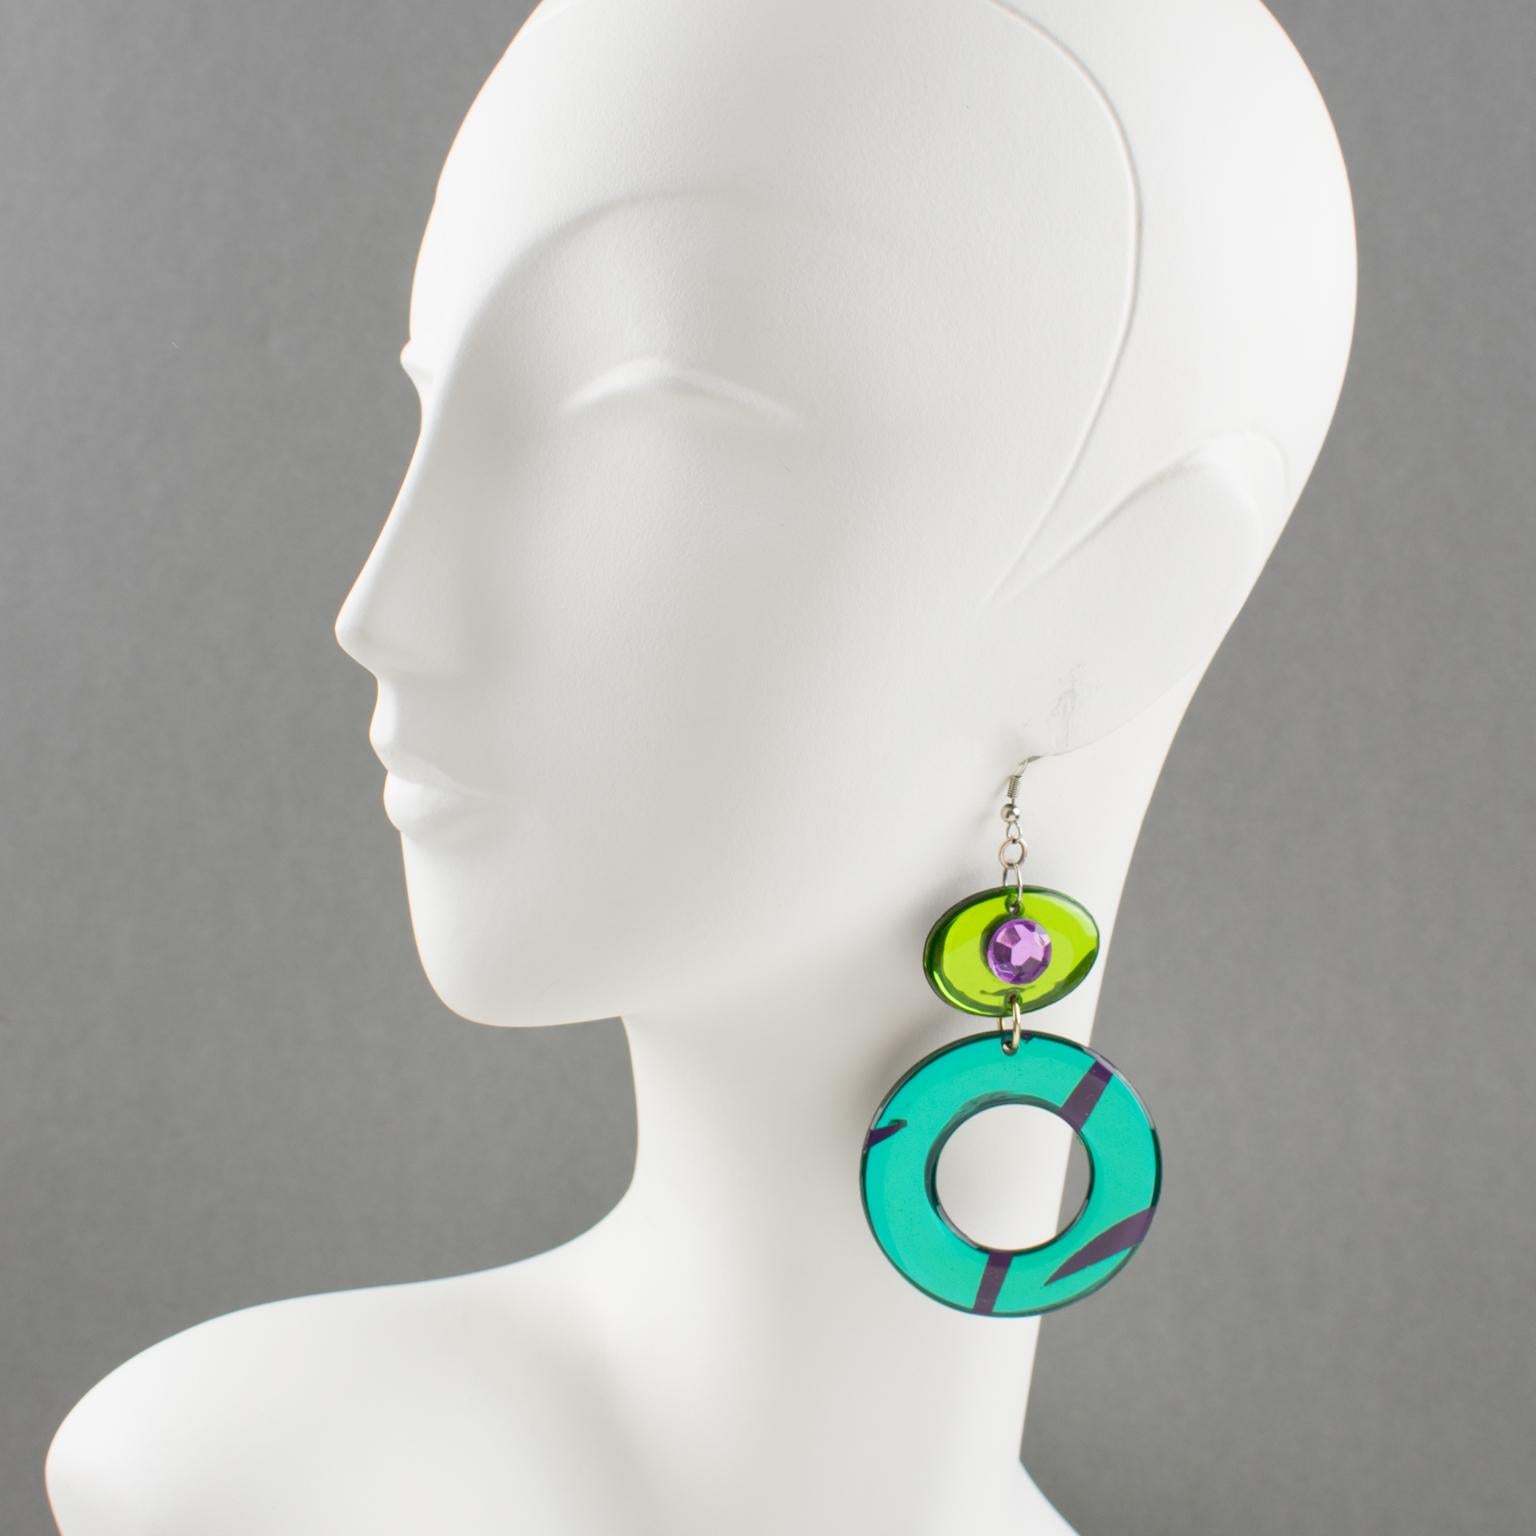 These adorable Italian designer studio Lucite or Resin dangling pierced earrings feature an oversized chandelier design with ovoid and donut shapes in emerald green and apple green colors with a mirror effect and textured pattern. The earrings are